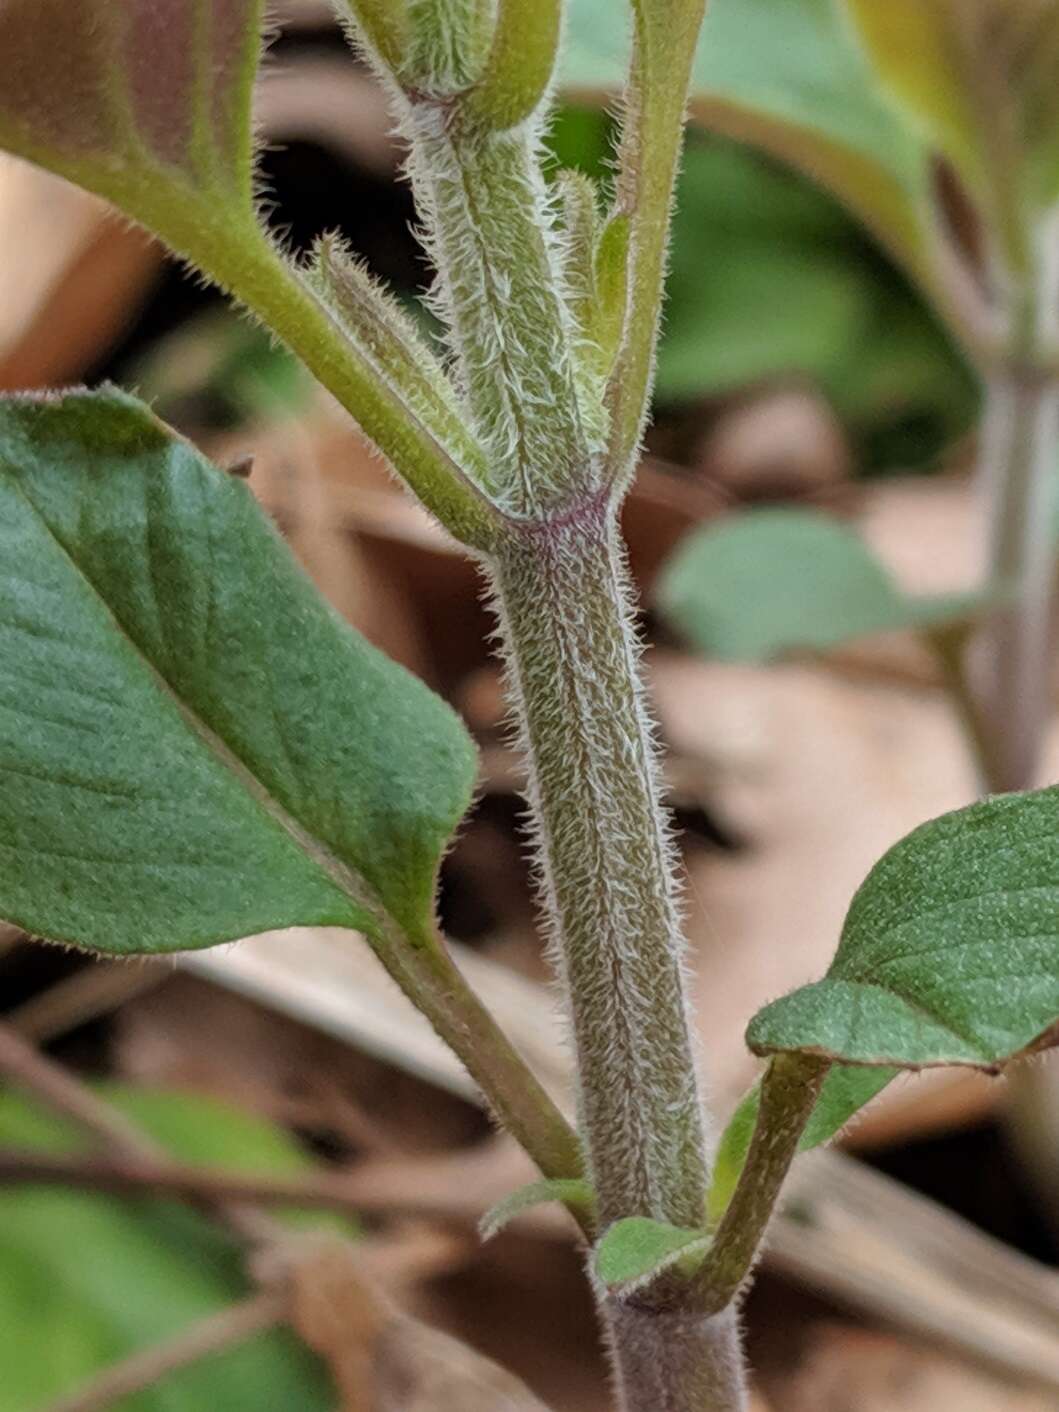 Image of hoary mountainmint